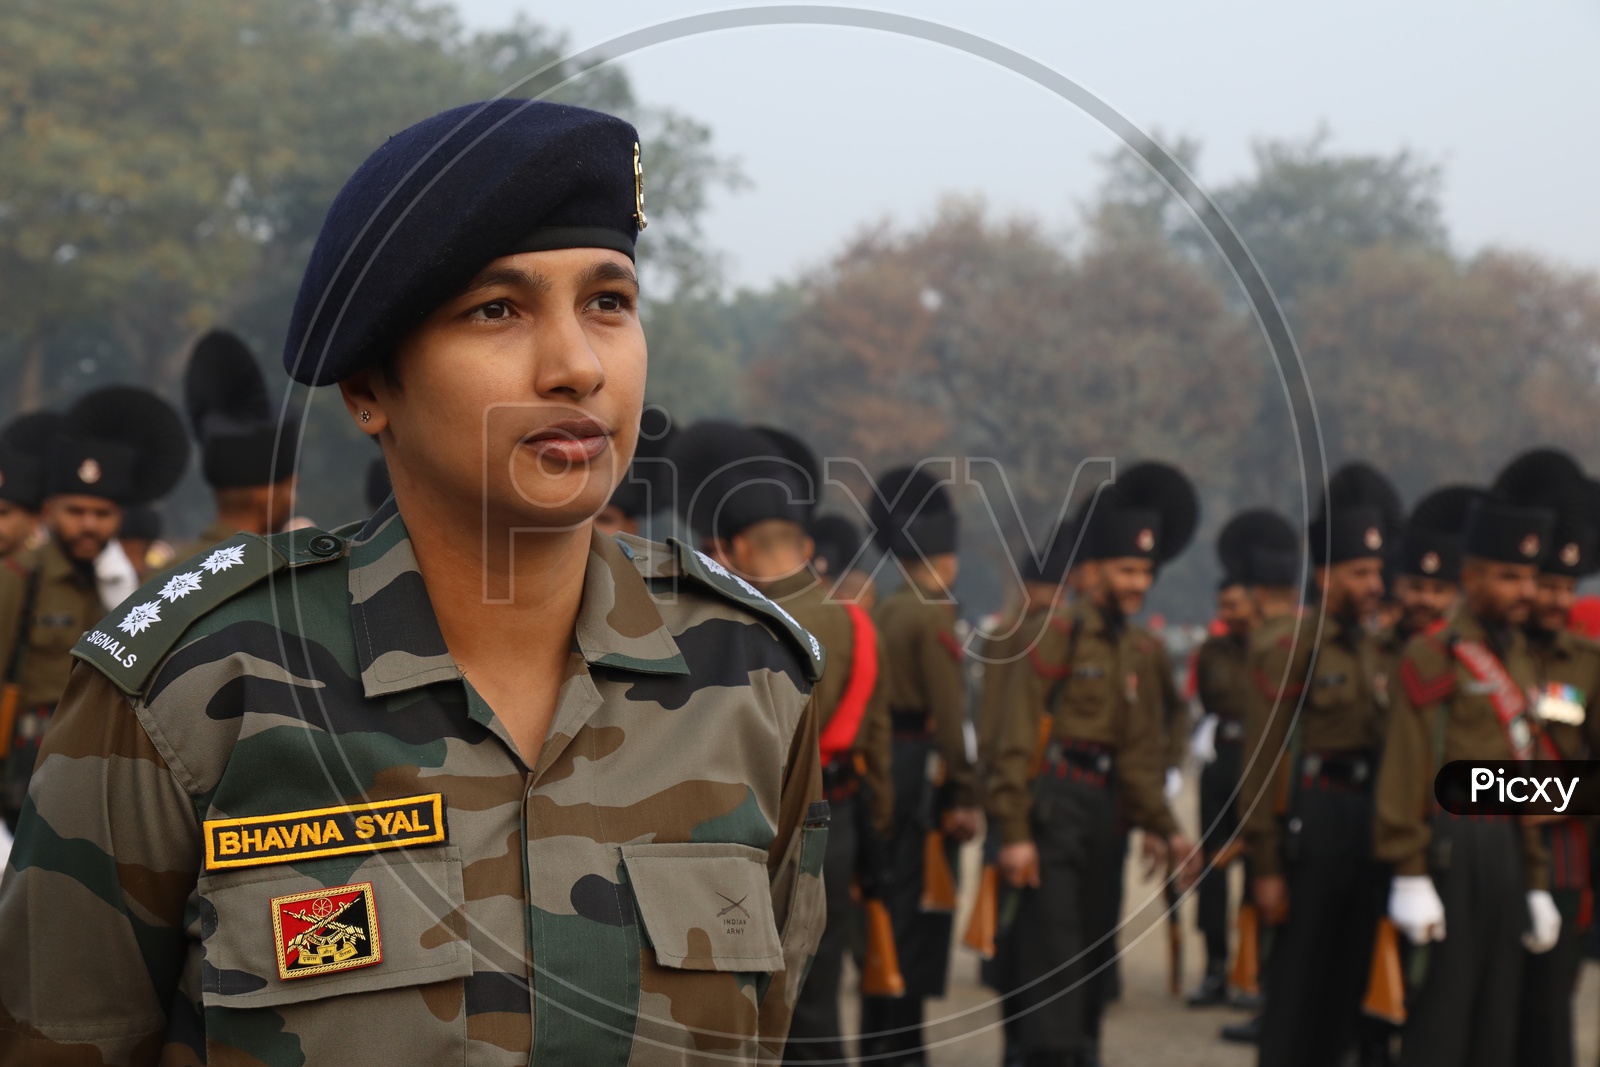 Woman Soldier in Indian Army